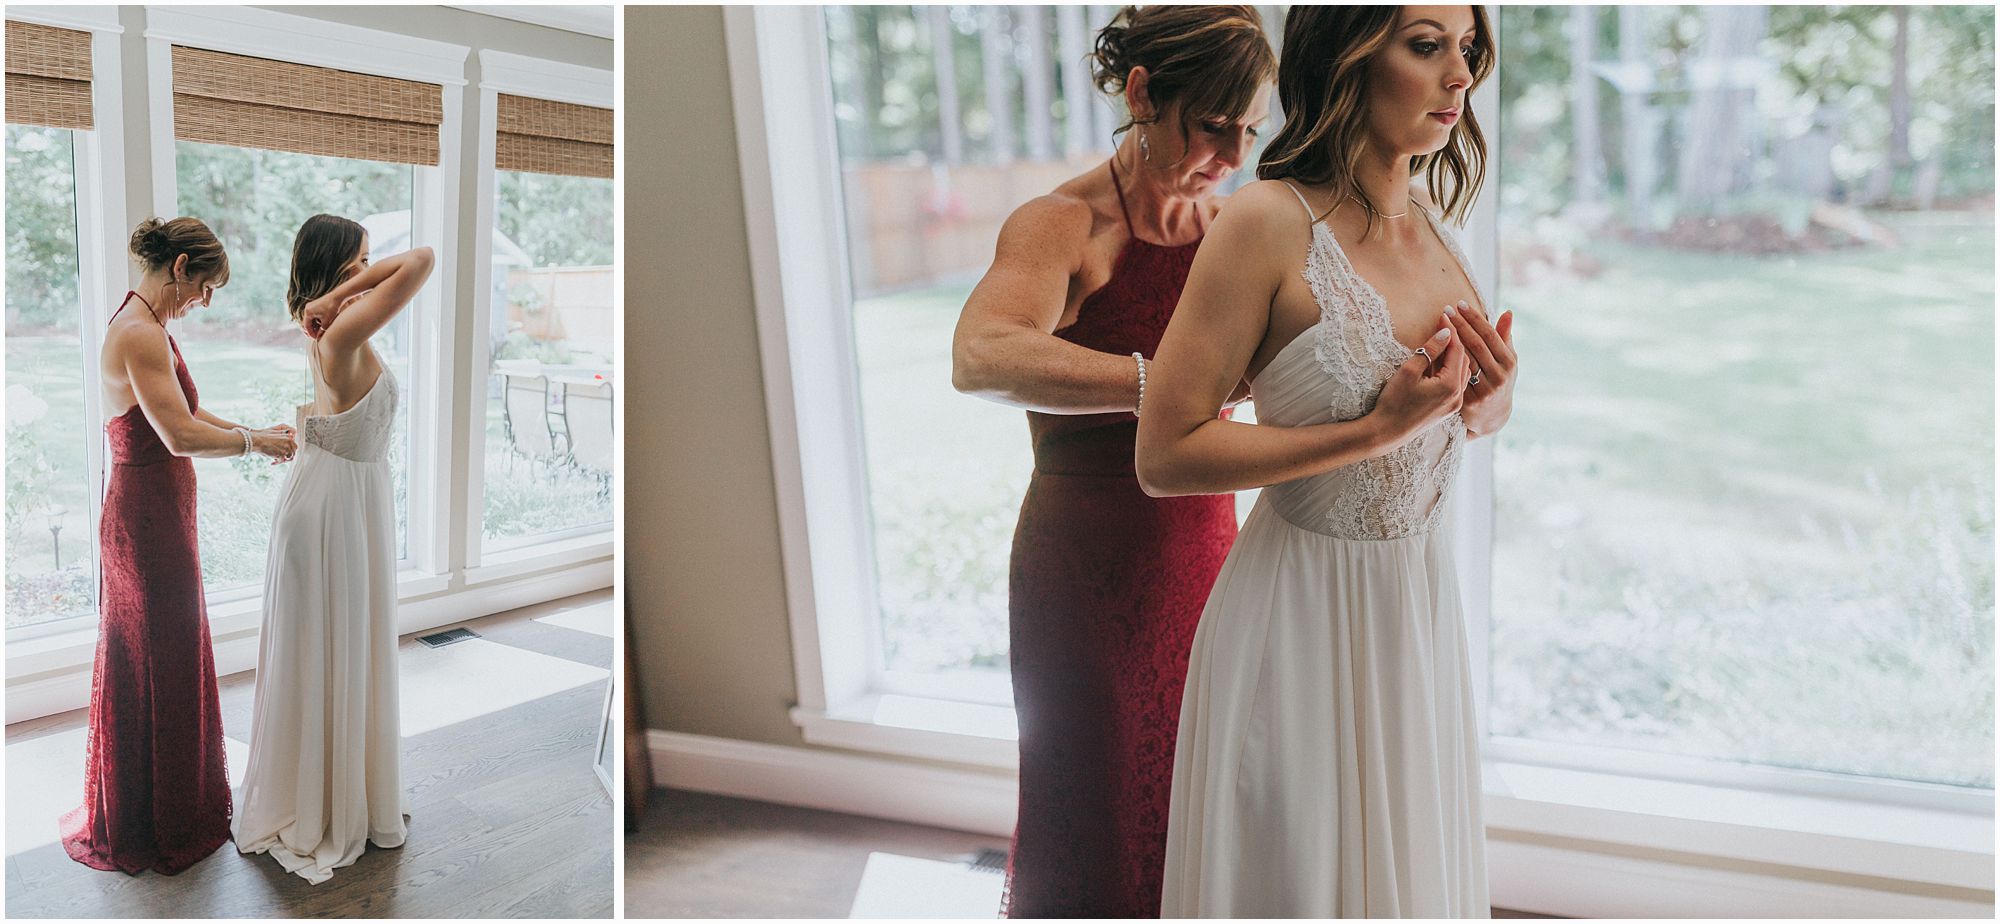 bride and her mom putting on wedding dress 